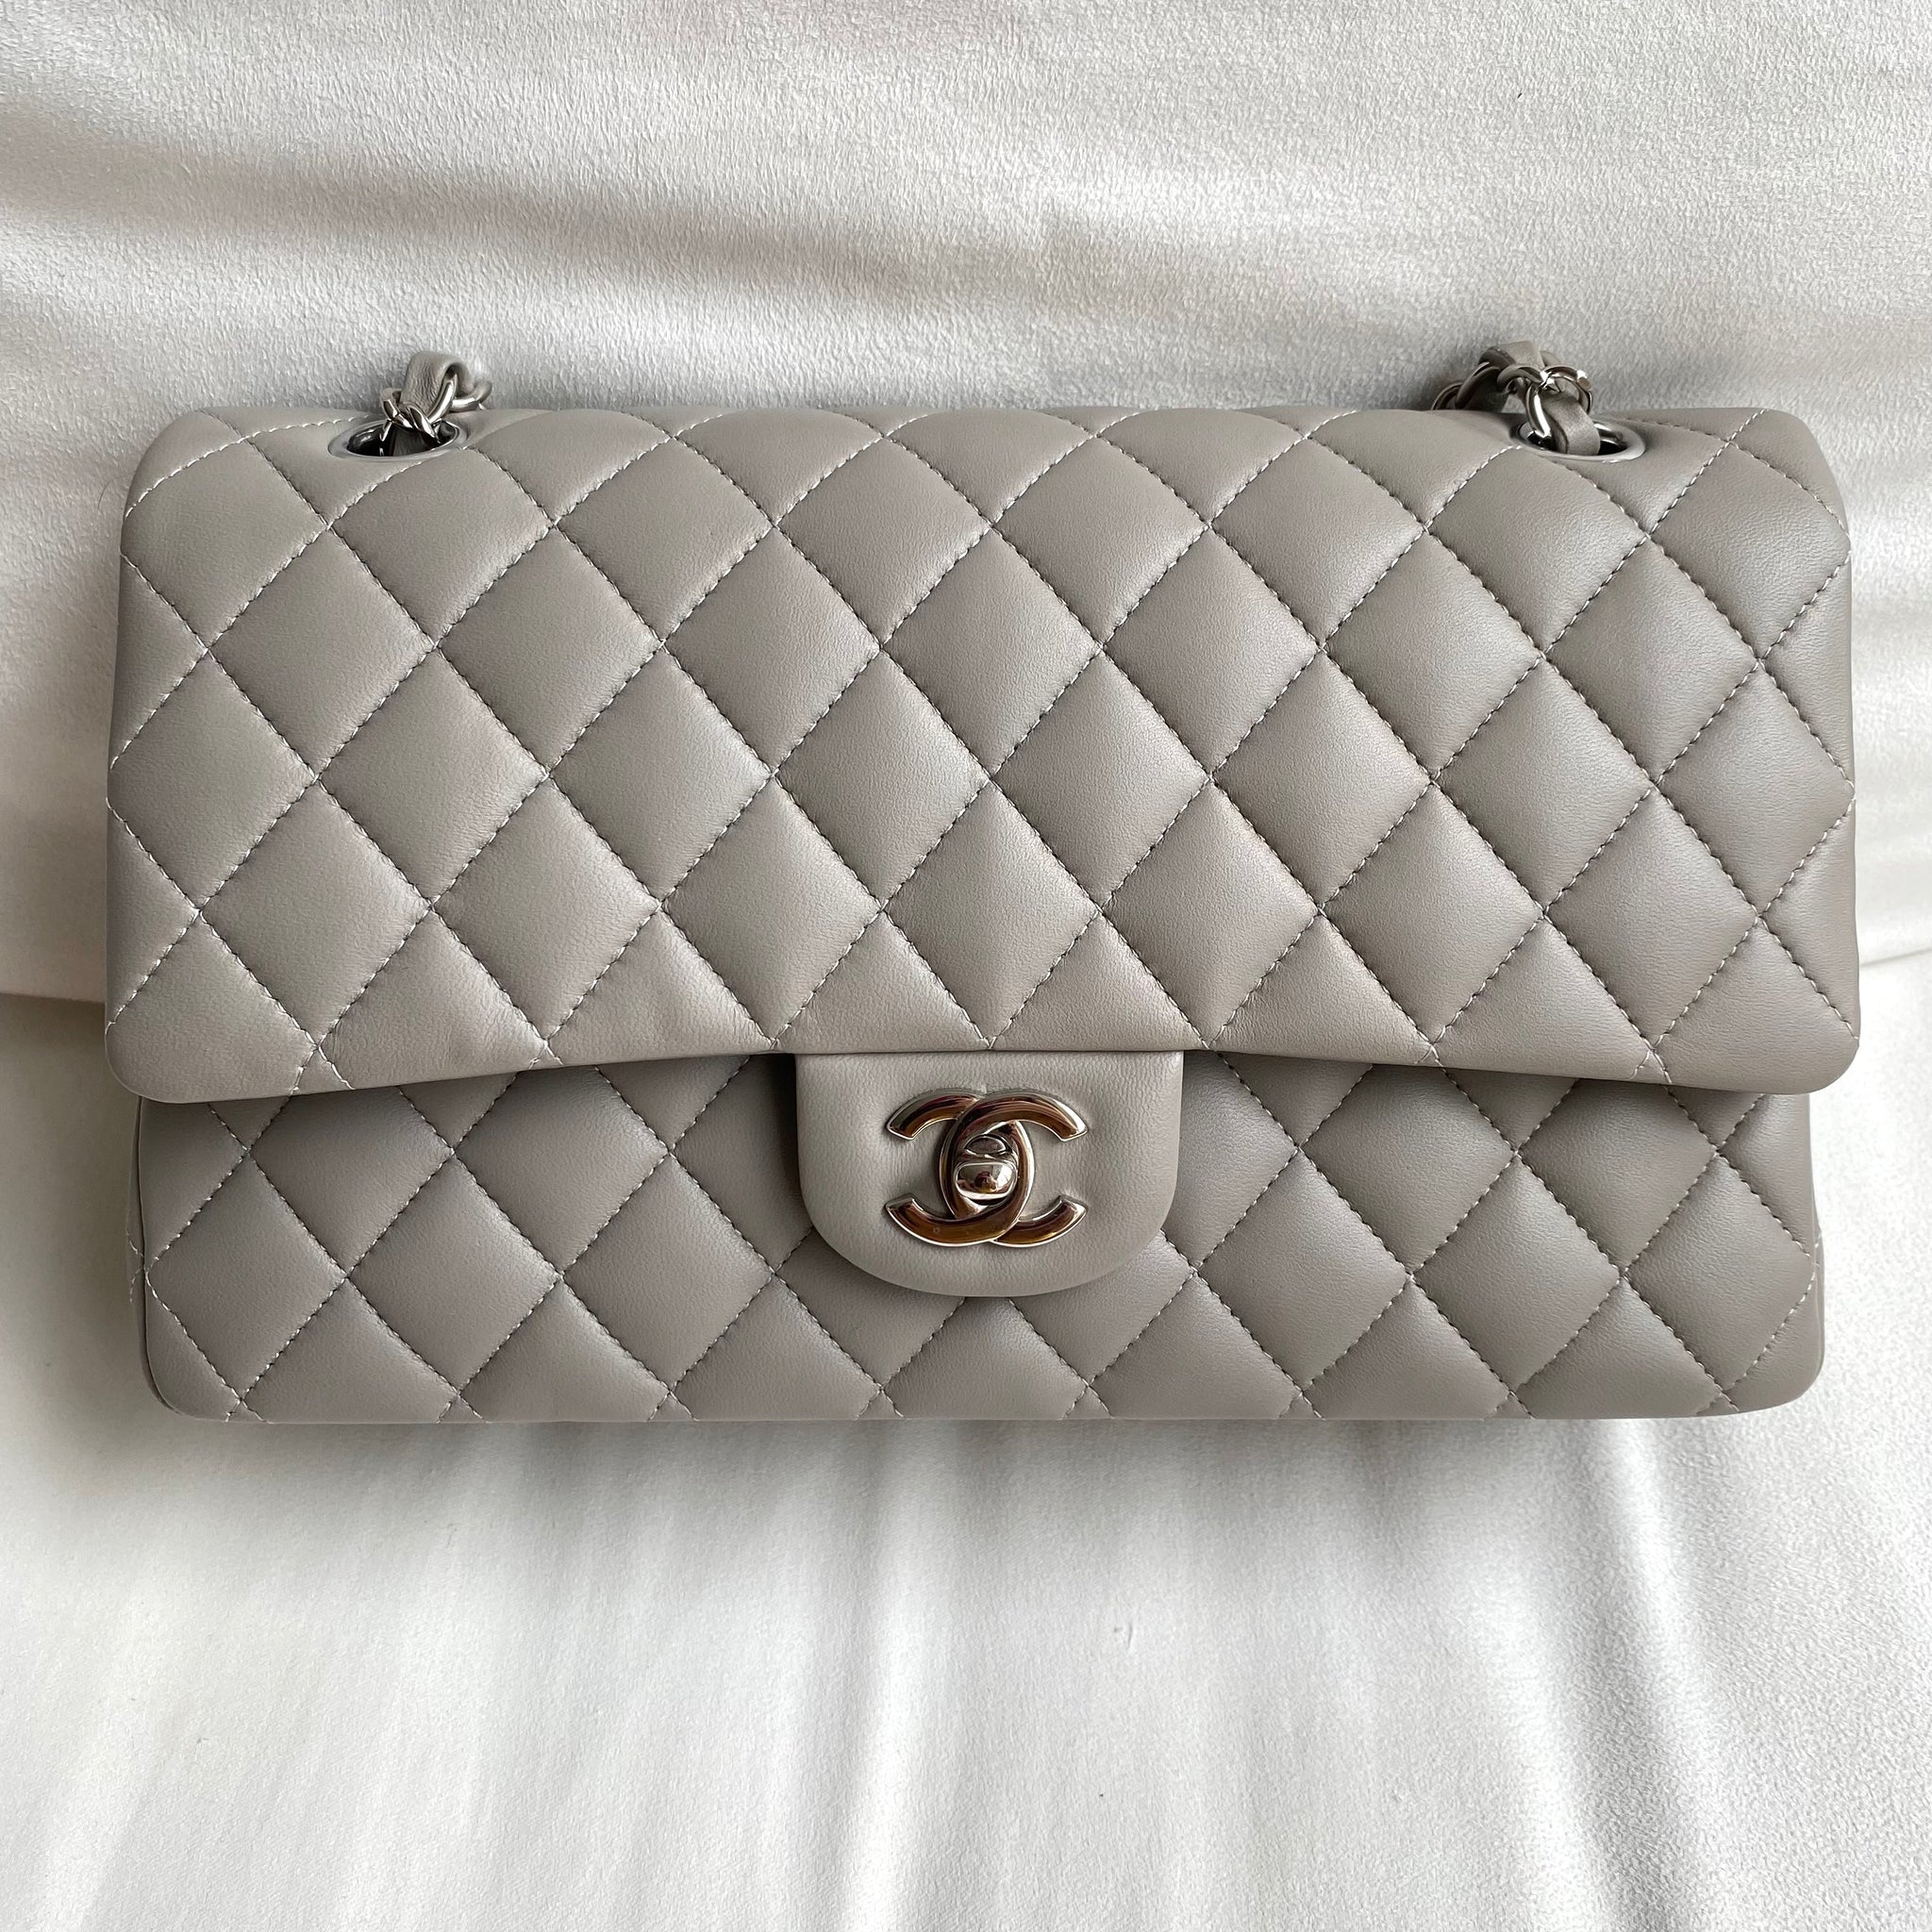 Luxury Personal Shopping on Instagram Chanel Classic Medium flap bag in  grey caviar leather with champagne h  Chanel classic medium flap Chanel  classic Chanel